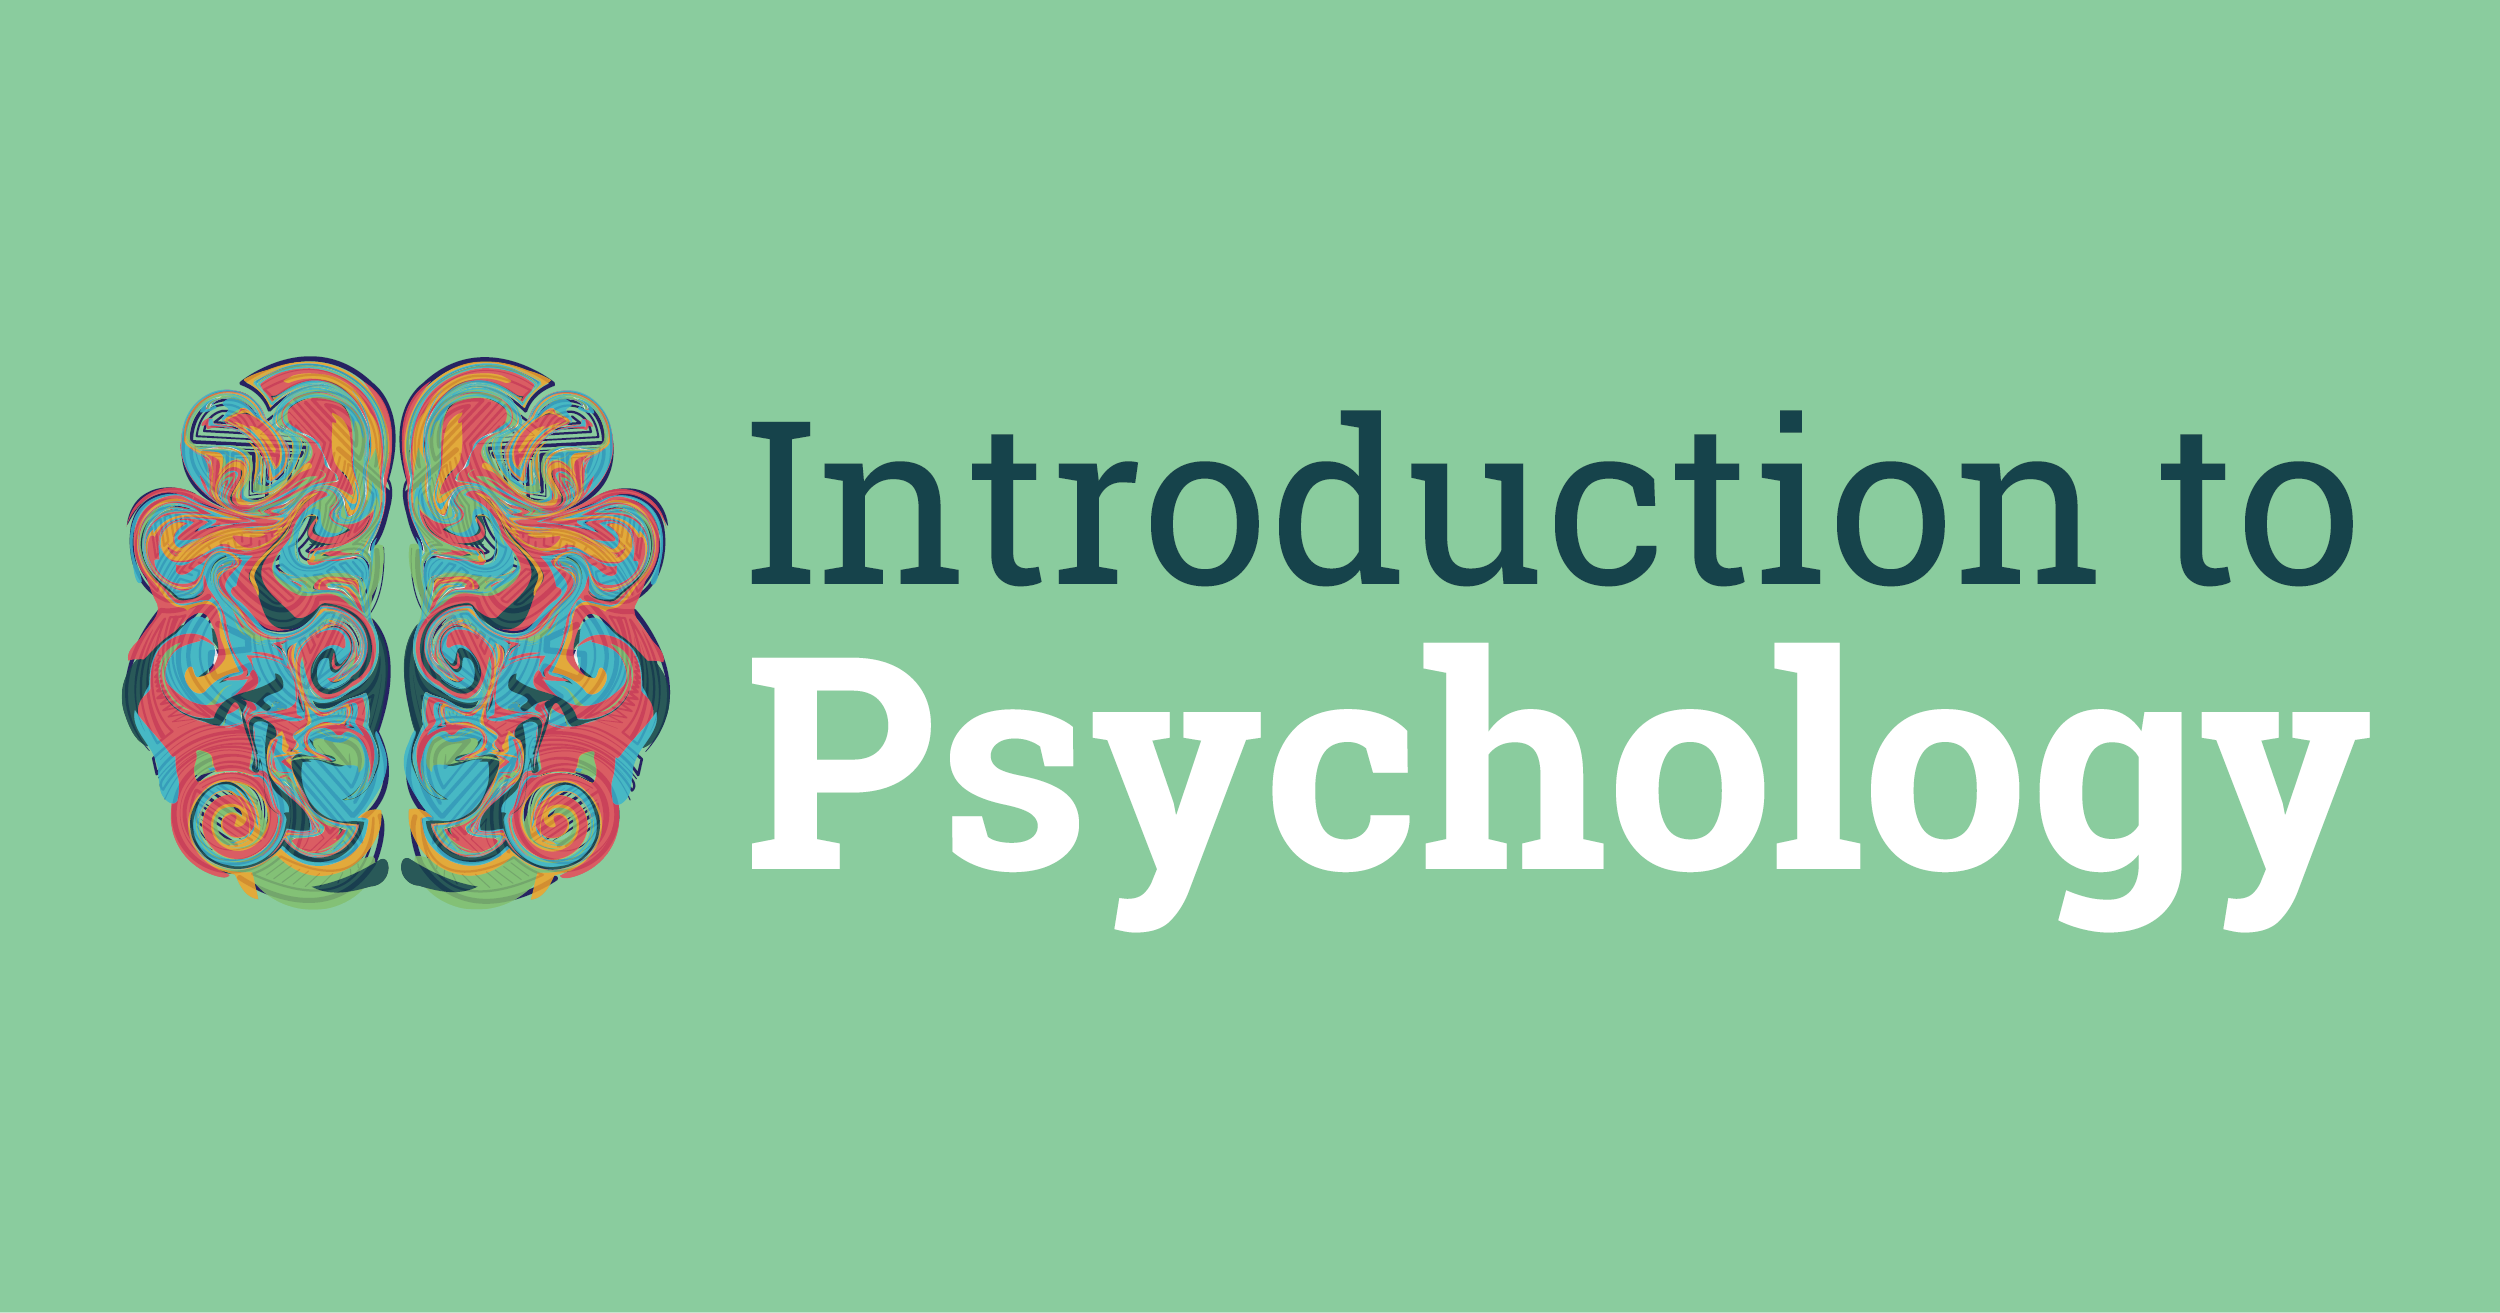 Intro to Psychology Course Material